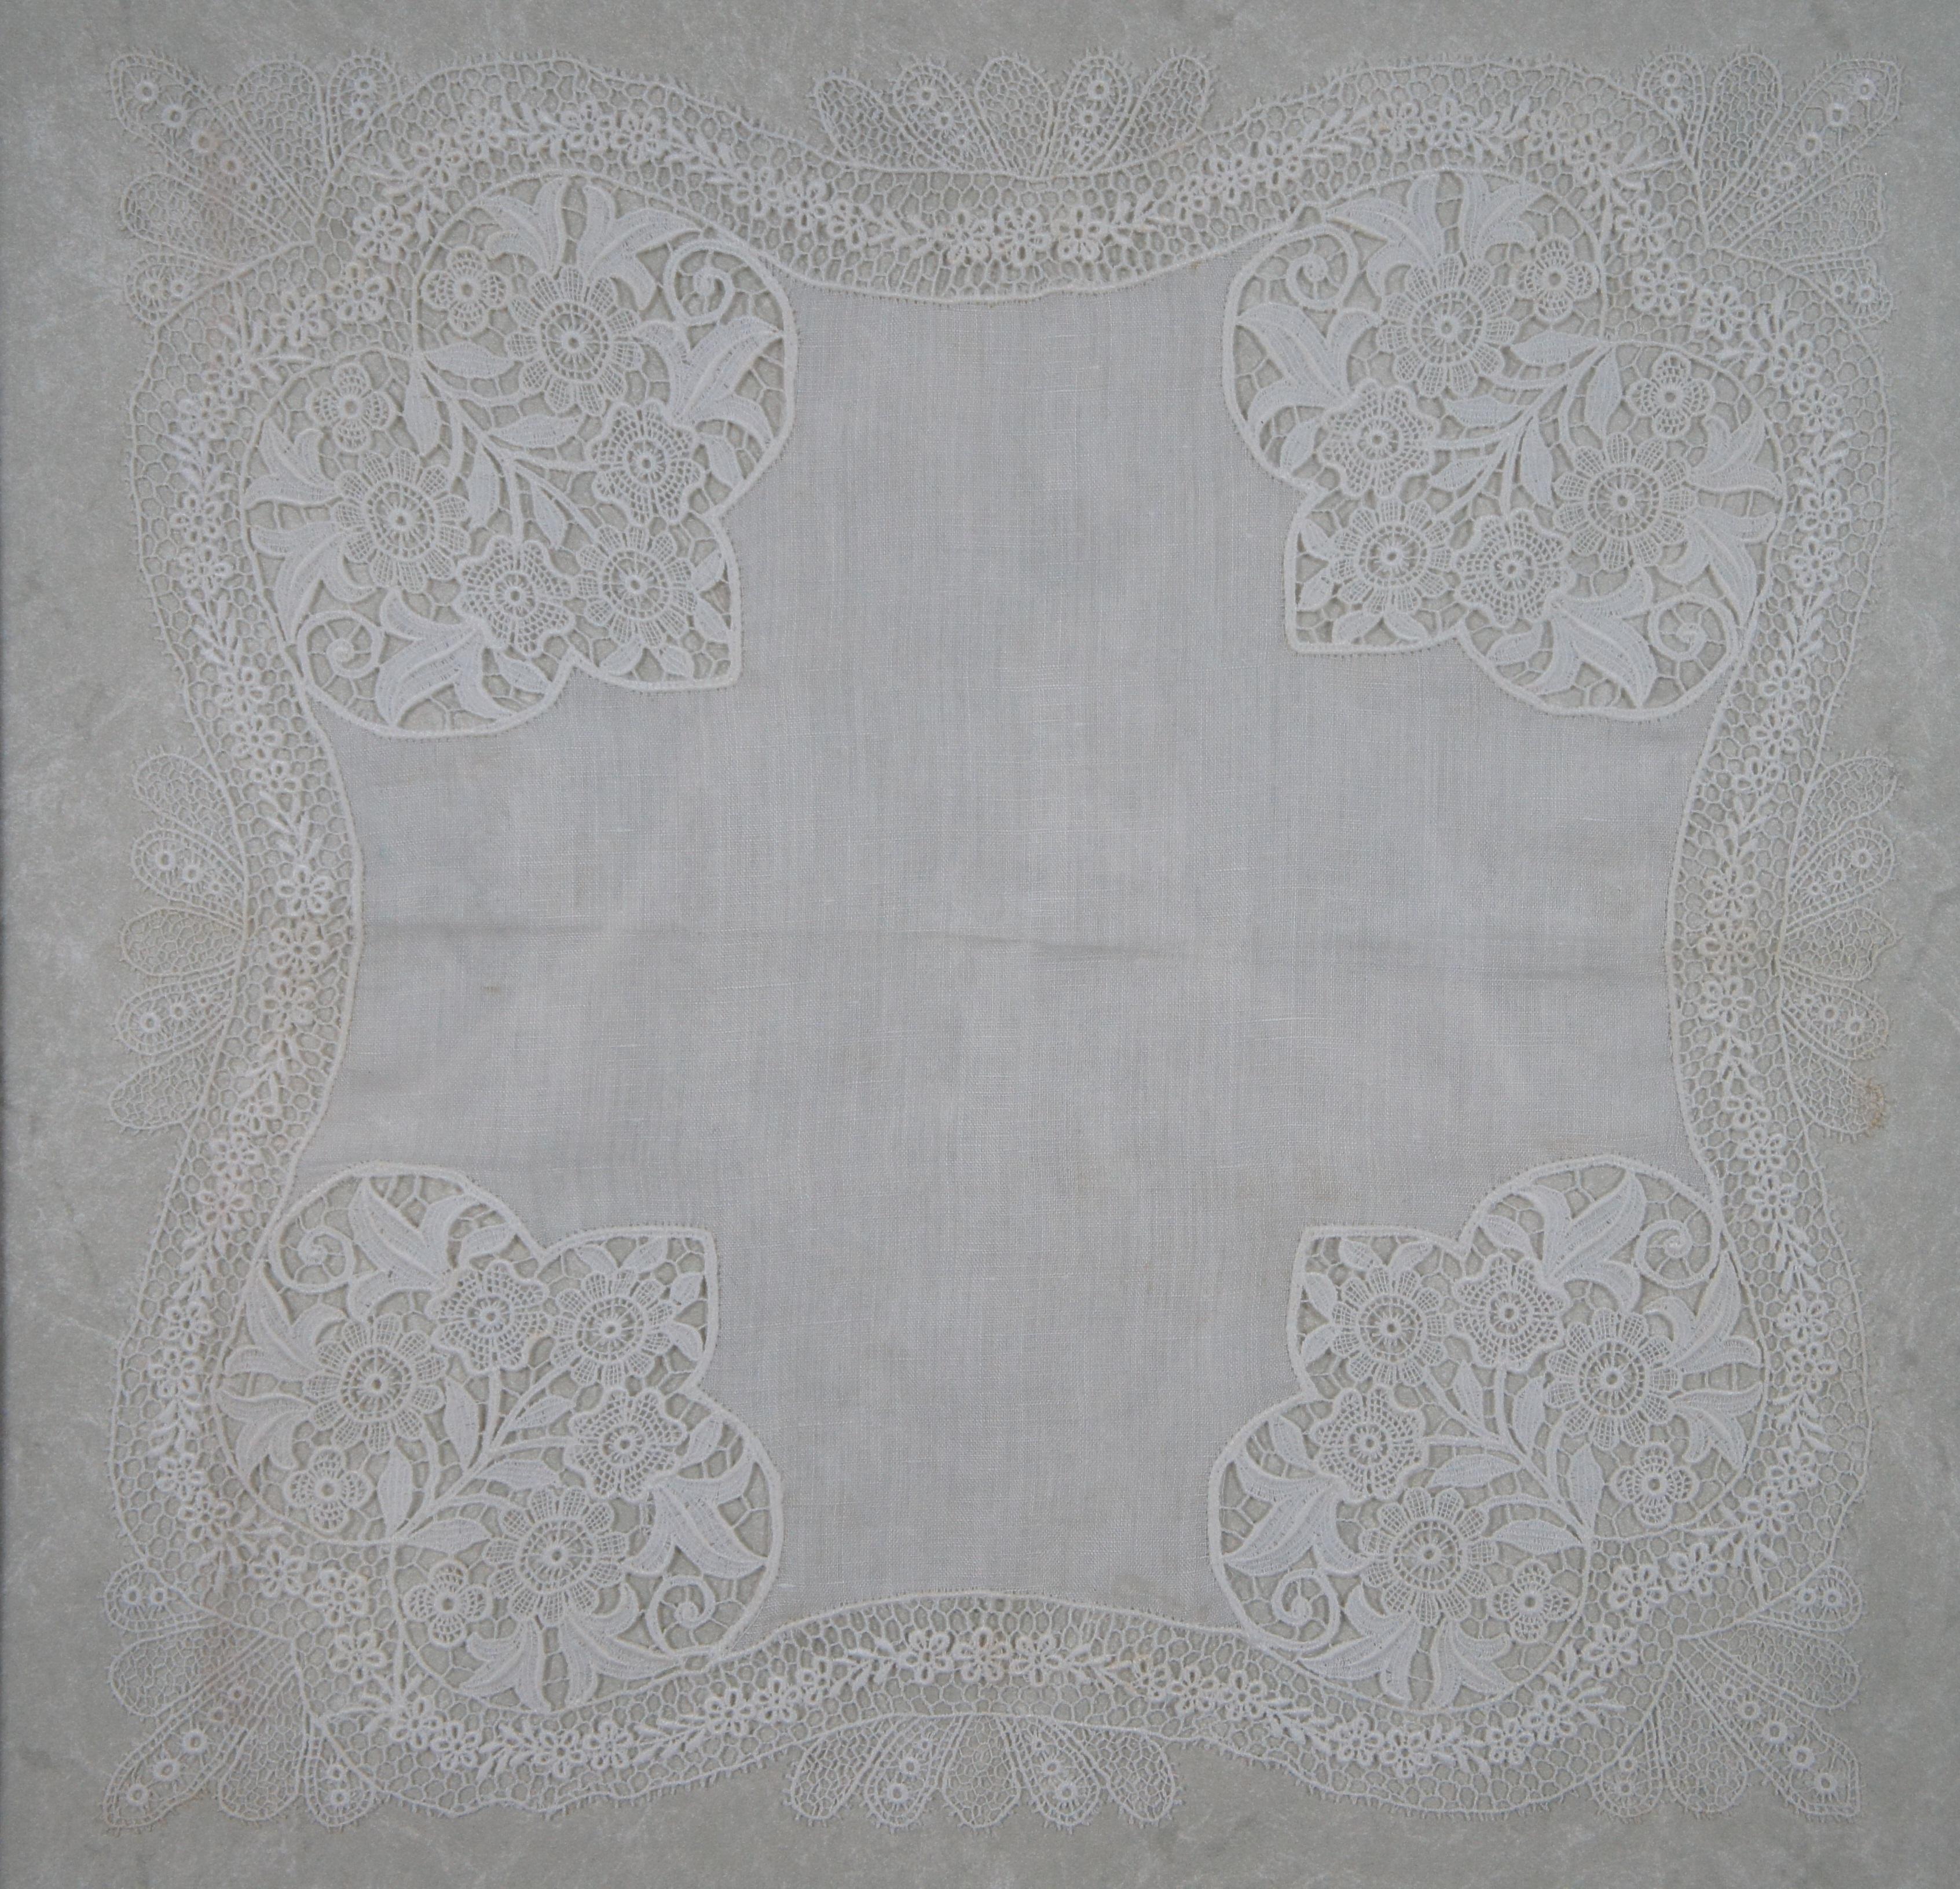 3 Antique Floral Embroidered Belgian Lace Handkerchiefs Wedding Framed 4